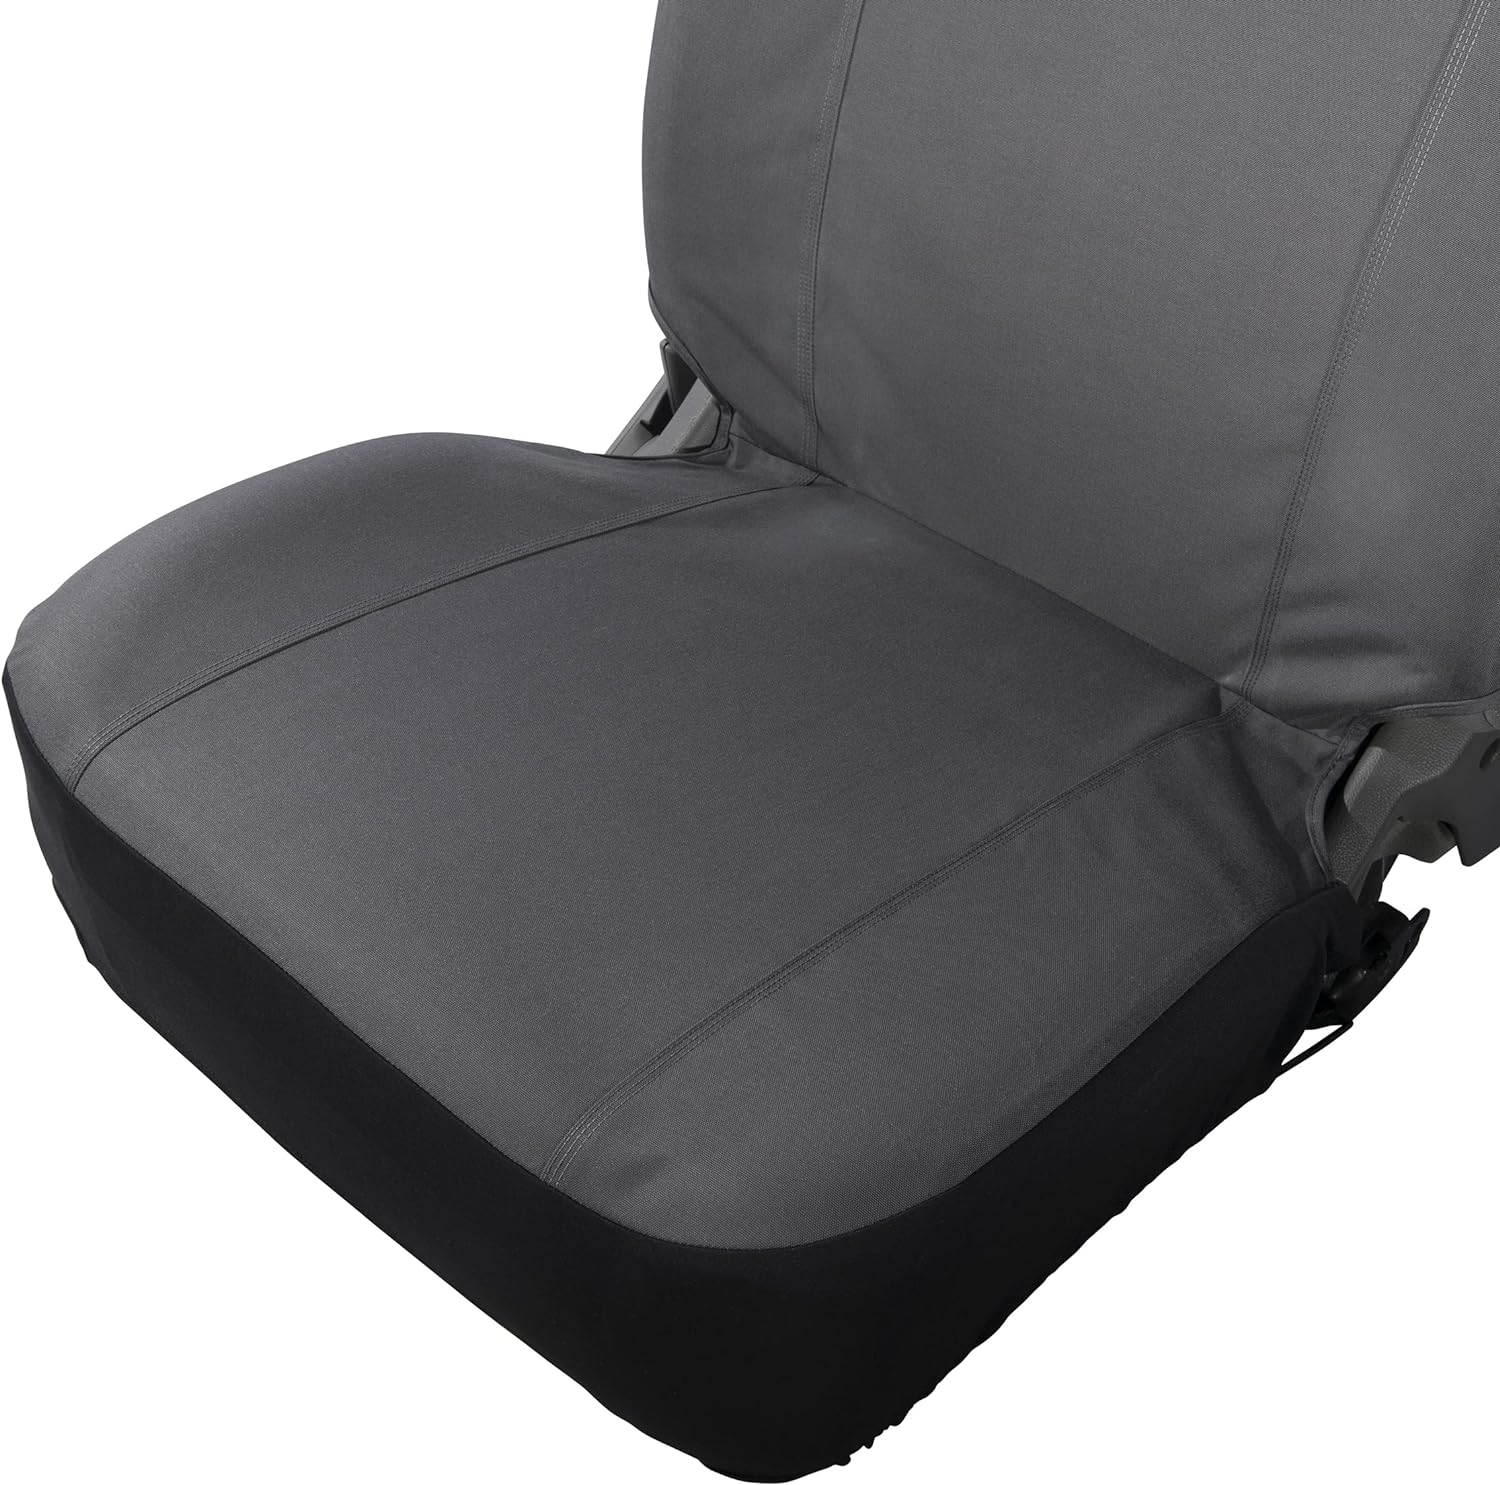 Carhartt Universal Nylon Duck Canvas Fitted Bucket Seat Covers, Durable Seat Protection with Rain Defender, One Size, Gravel